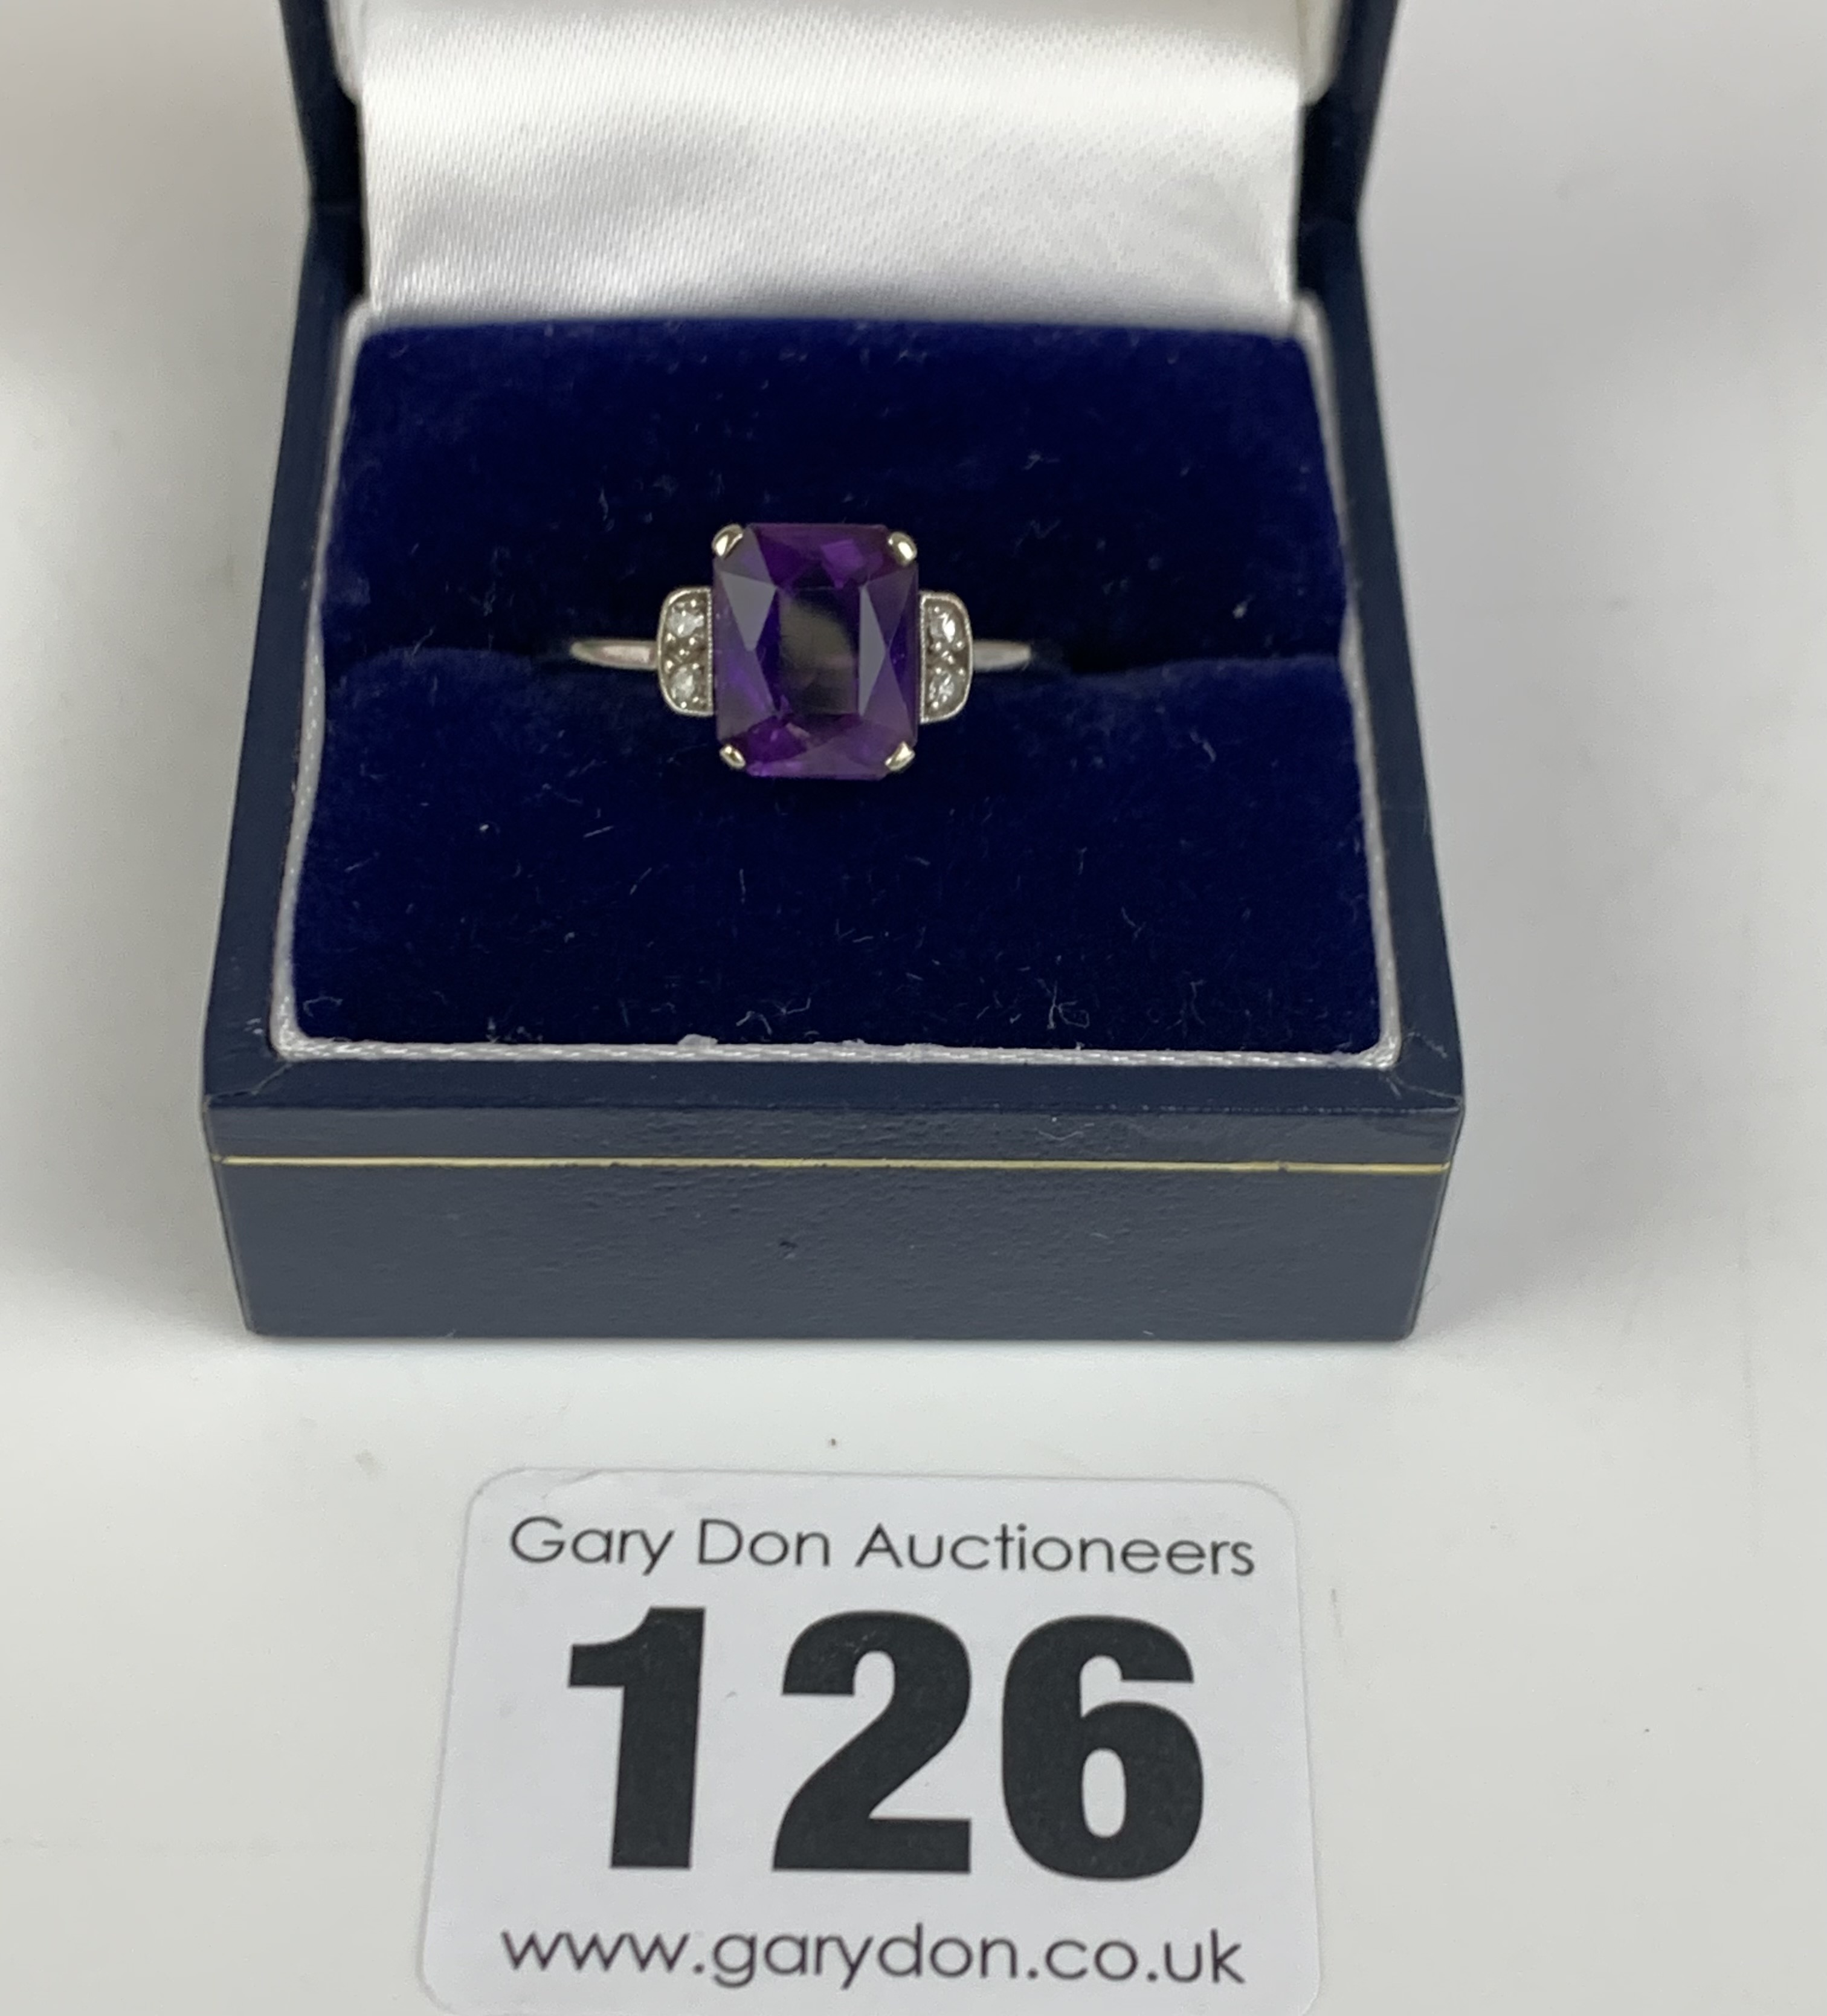 9k gold and purple stone ring, size R/S, w: 2.1 gms